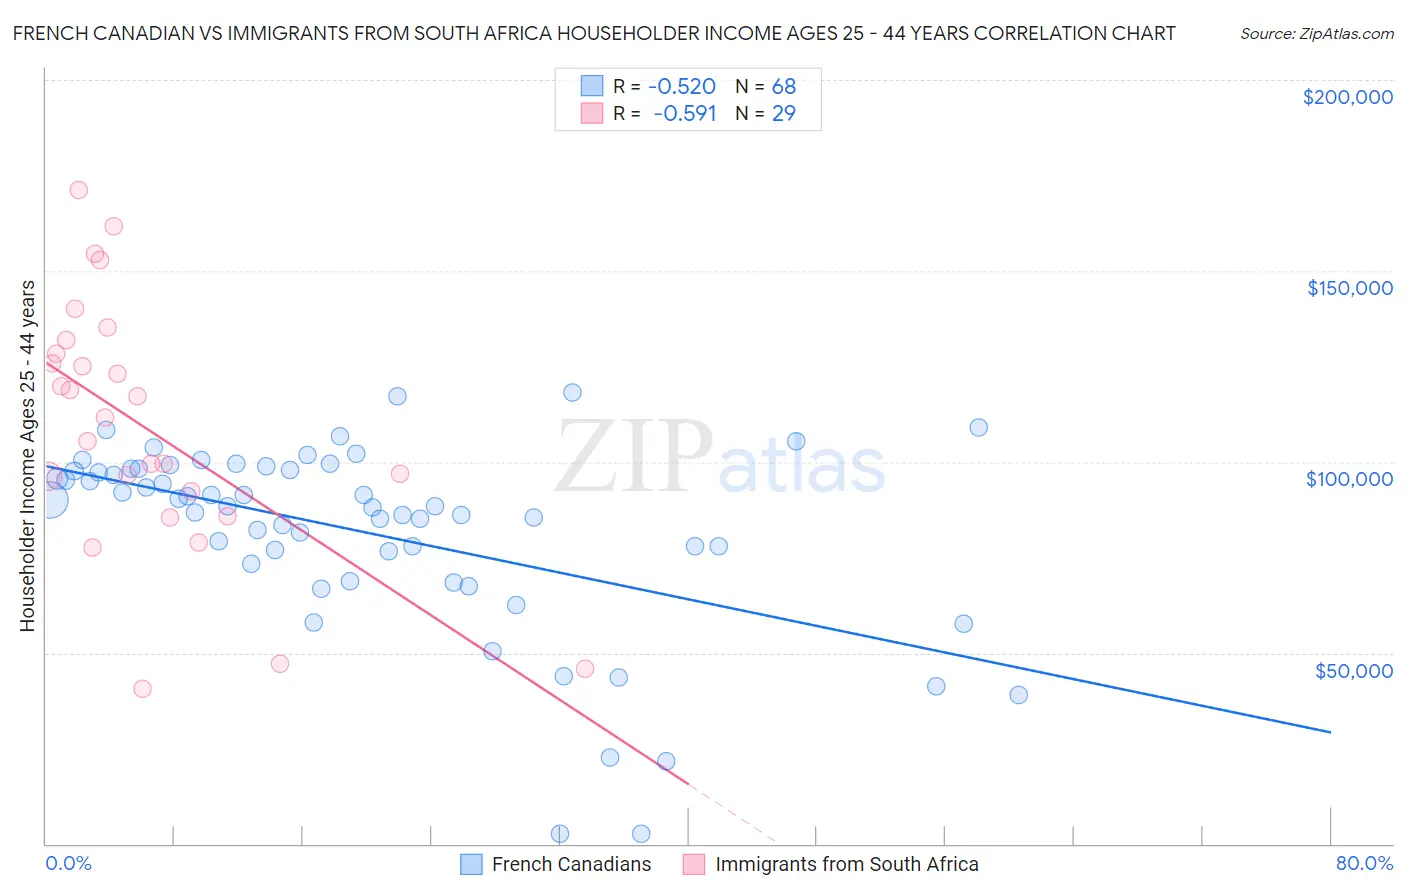 French Canadian vs Immigrants from South Africa Householder Income Ages 25 - 44 years